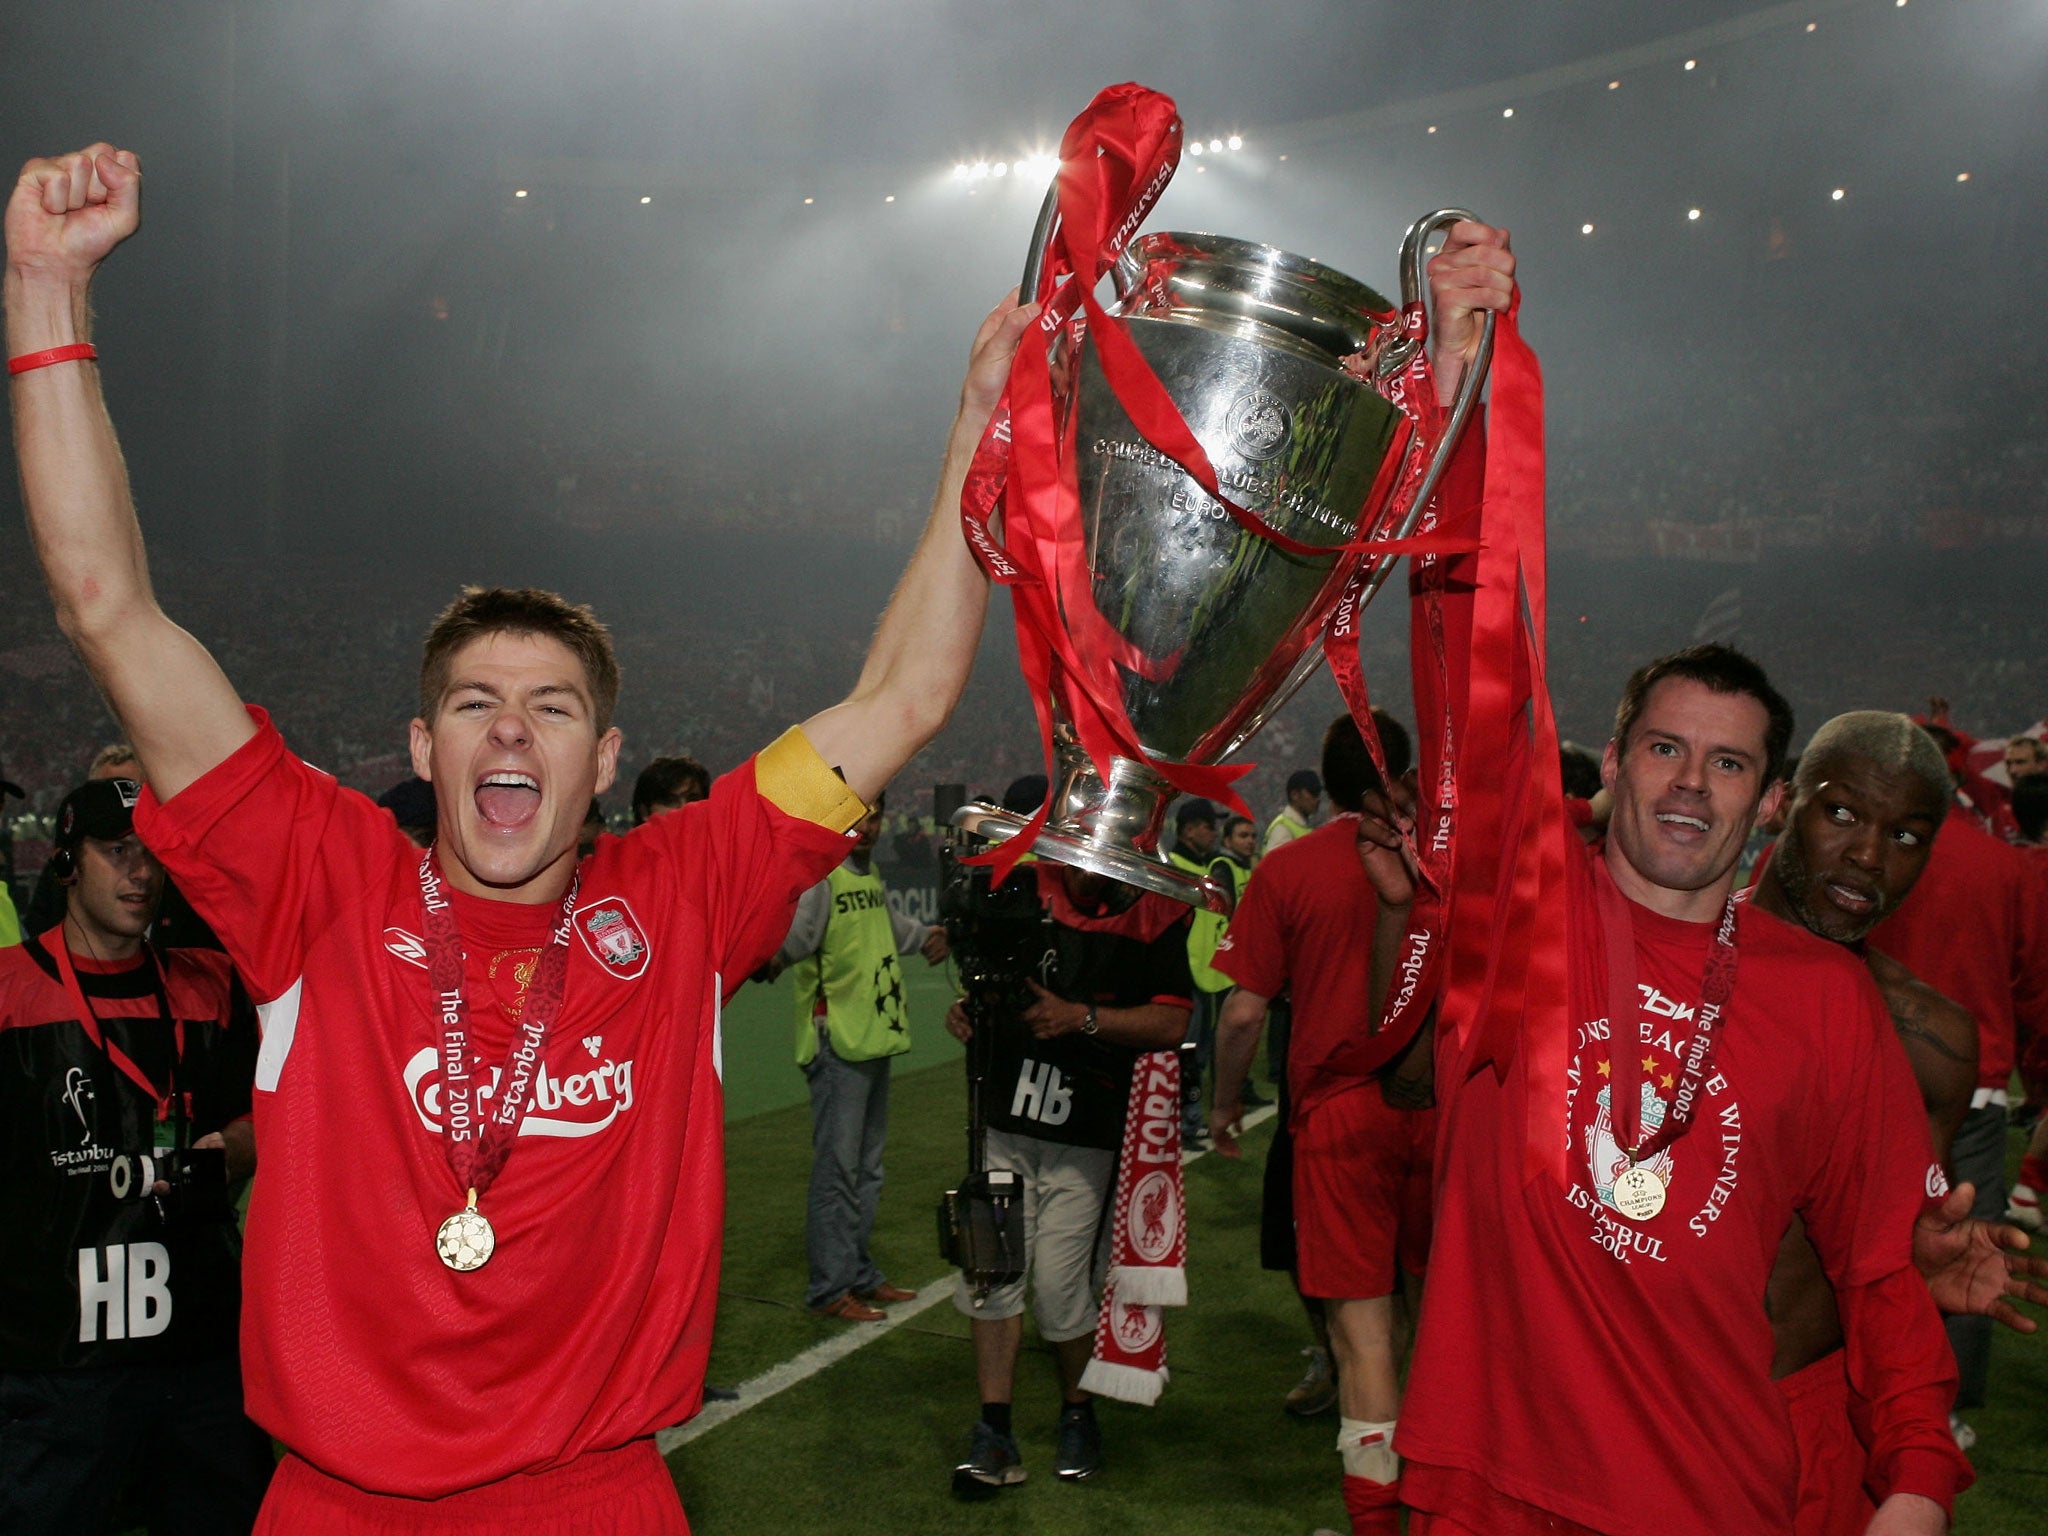 Benitez led Liverpool to the Champions League in 2005